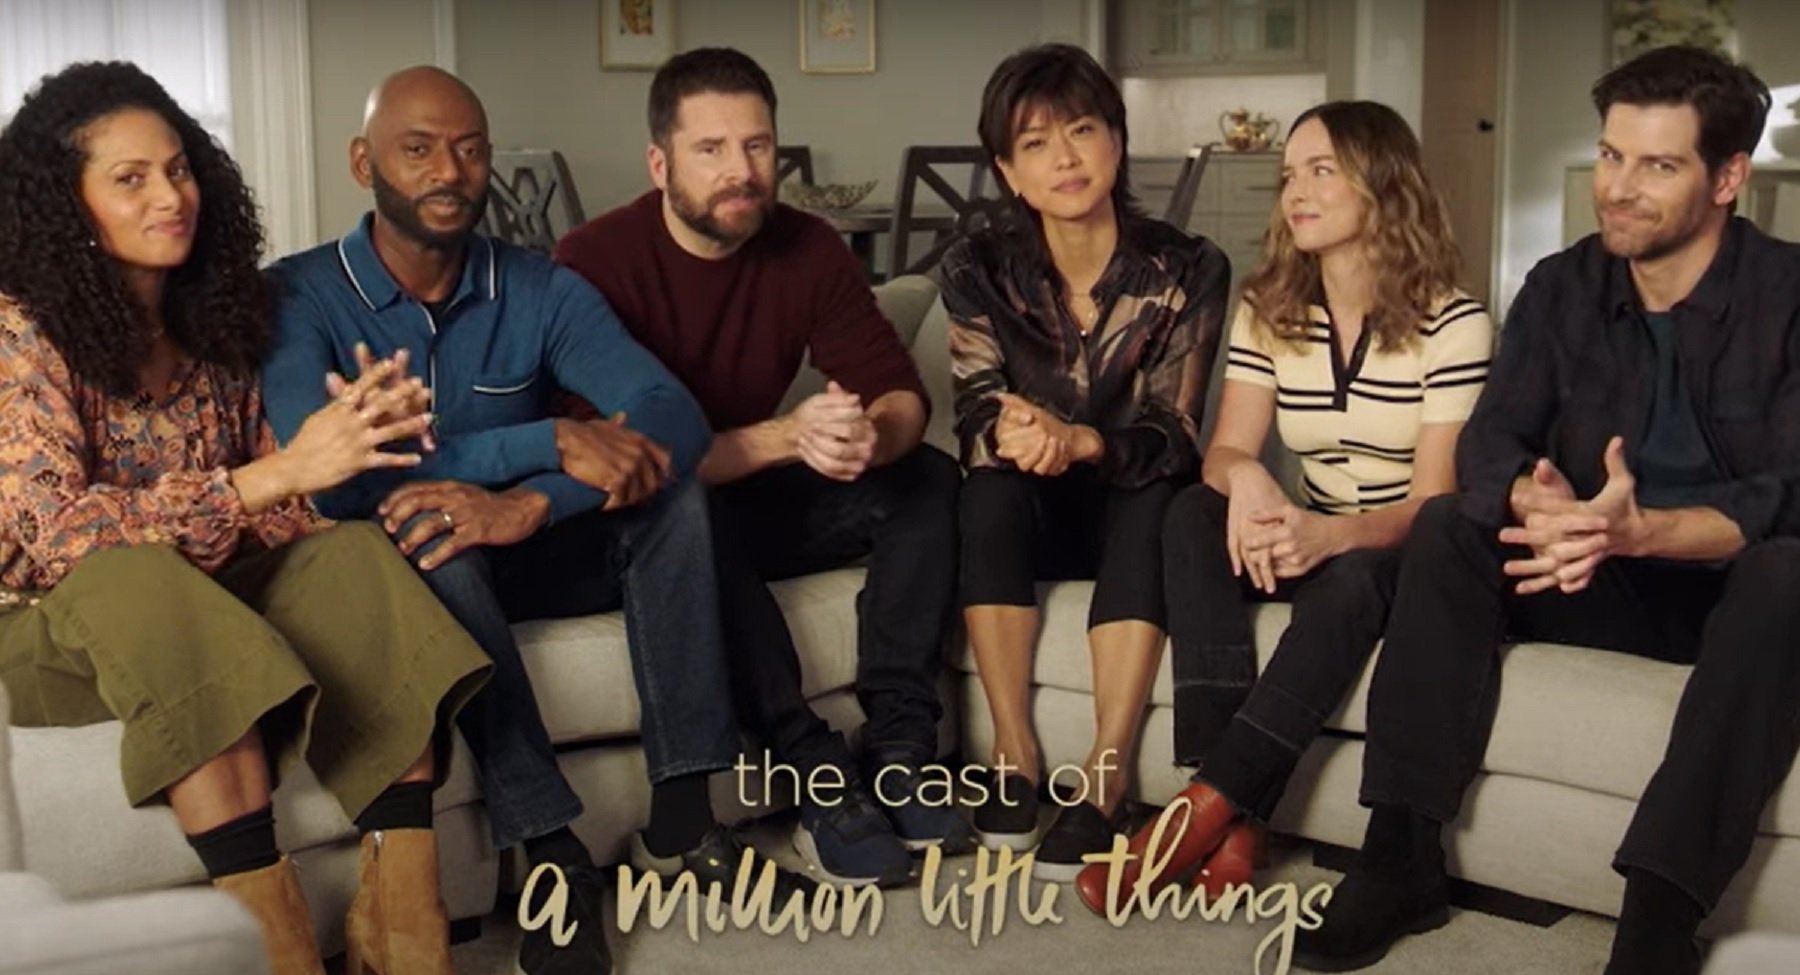 ‘A Million Little Things’ Season 5 Cast Announcement Was Missing a Key Player